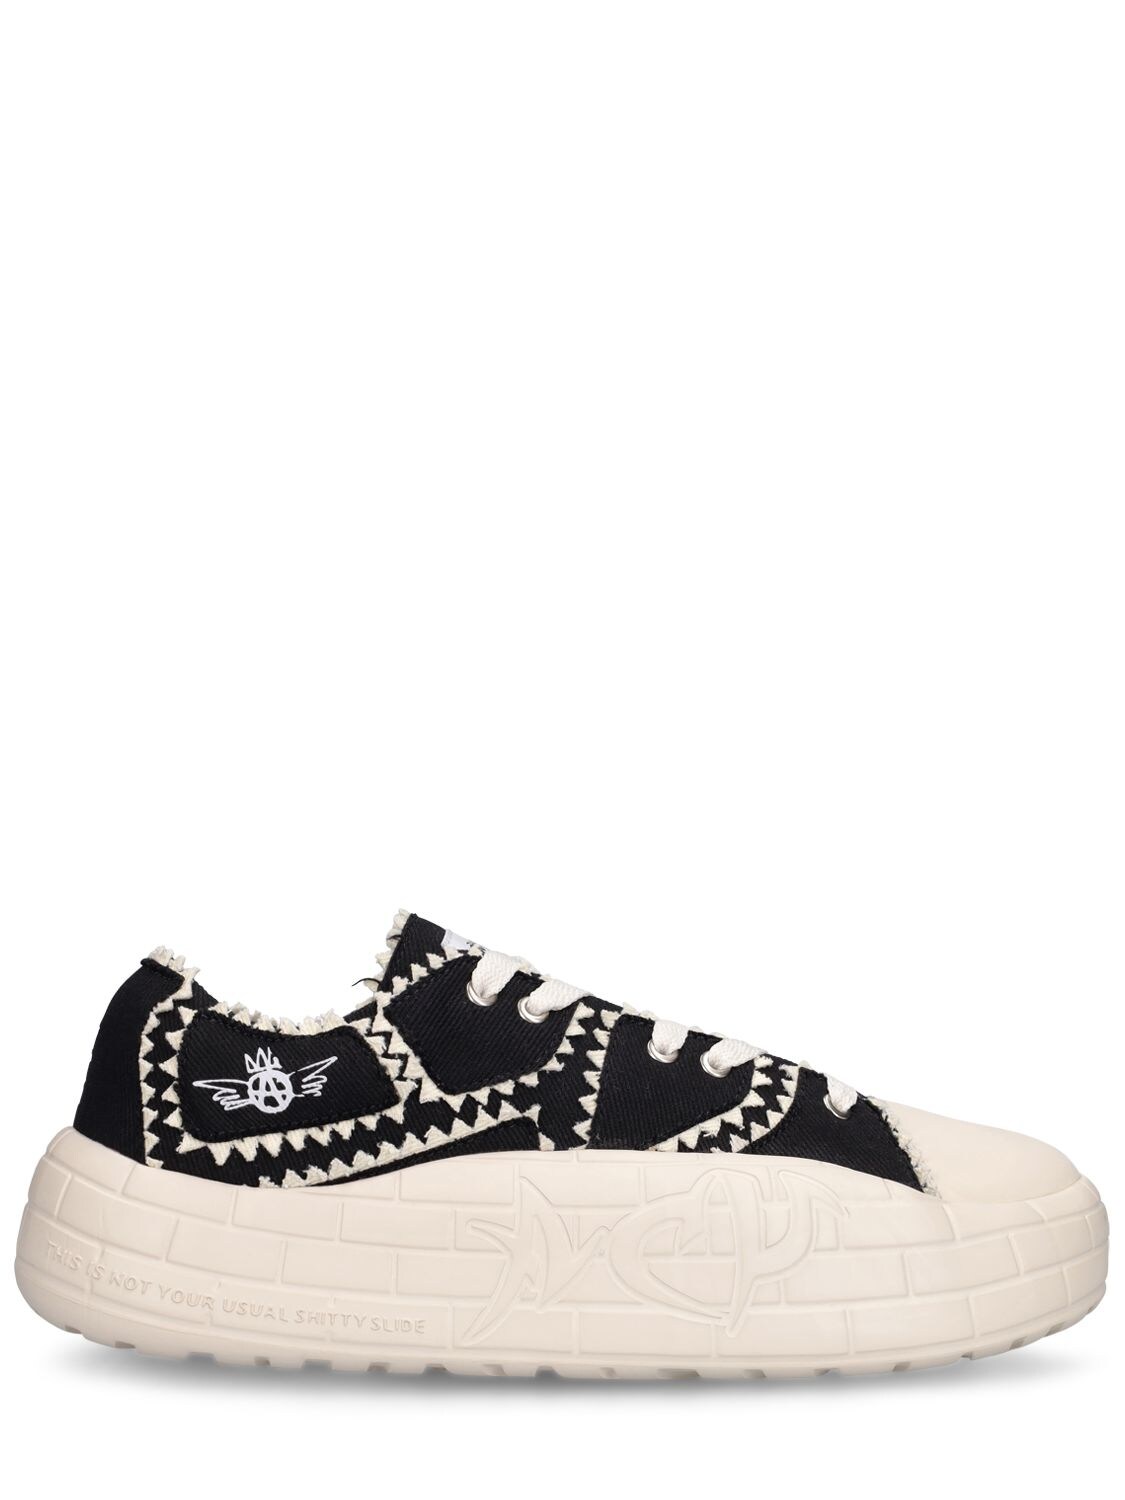 Acupuncture Nyu Vulc Canvas Sneakers In Black